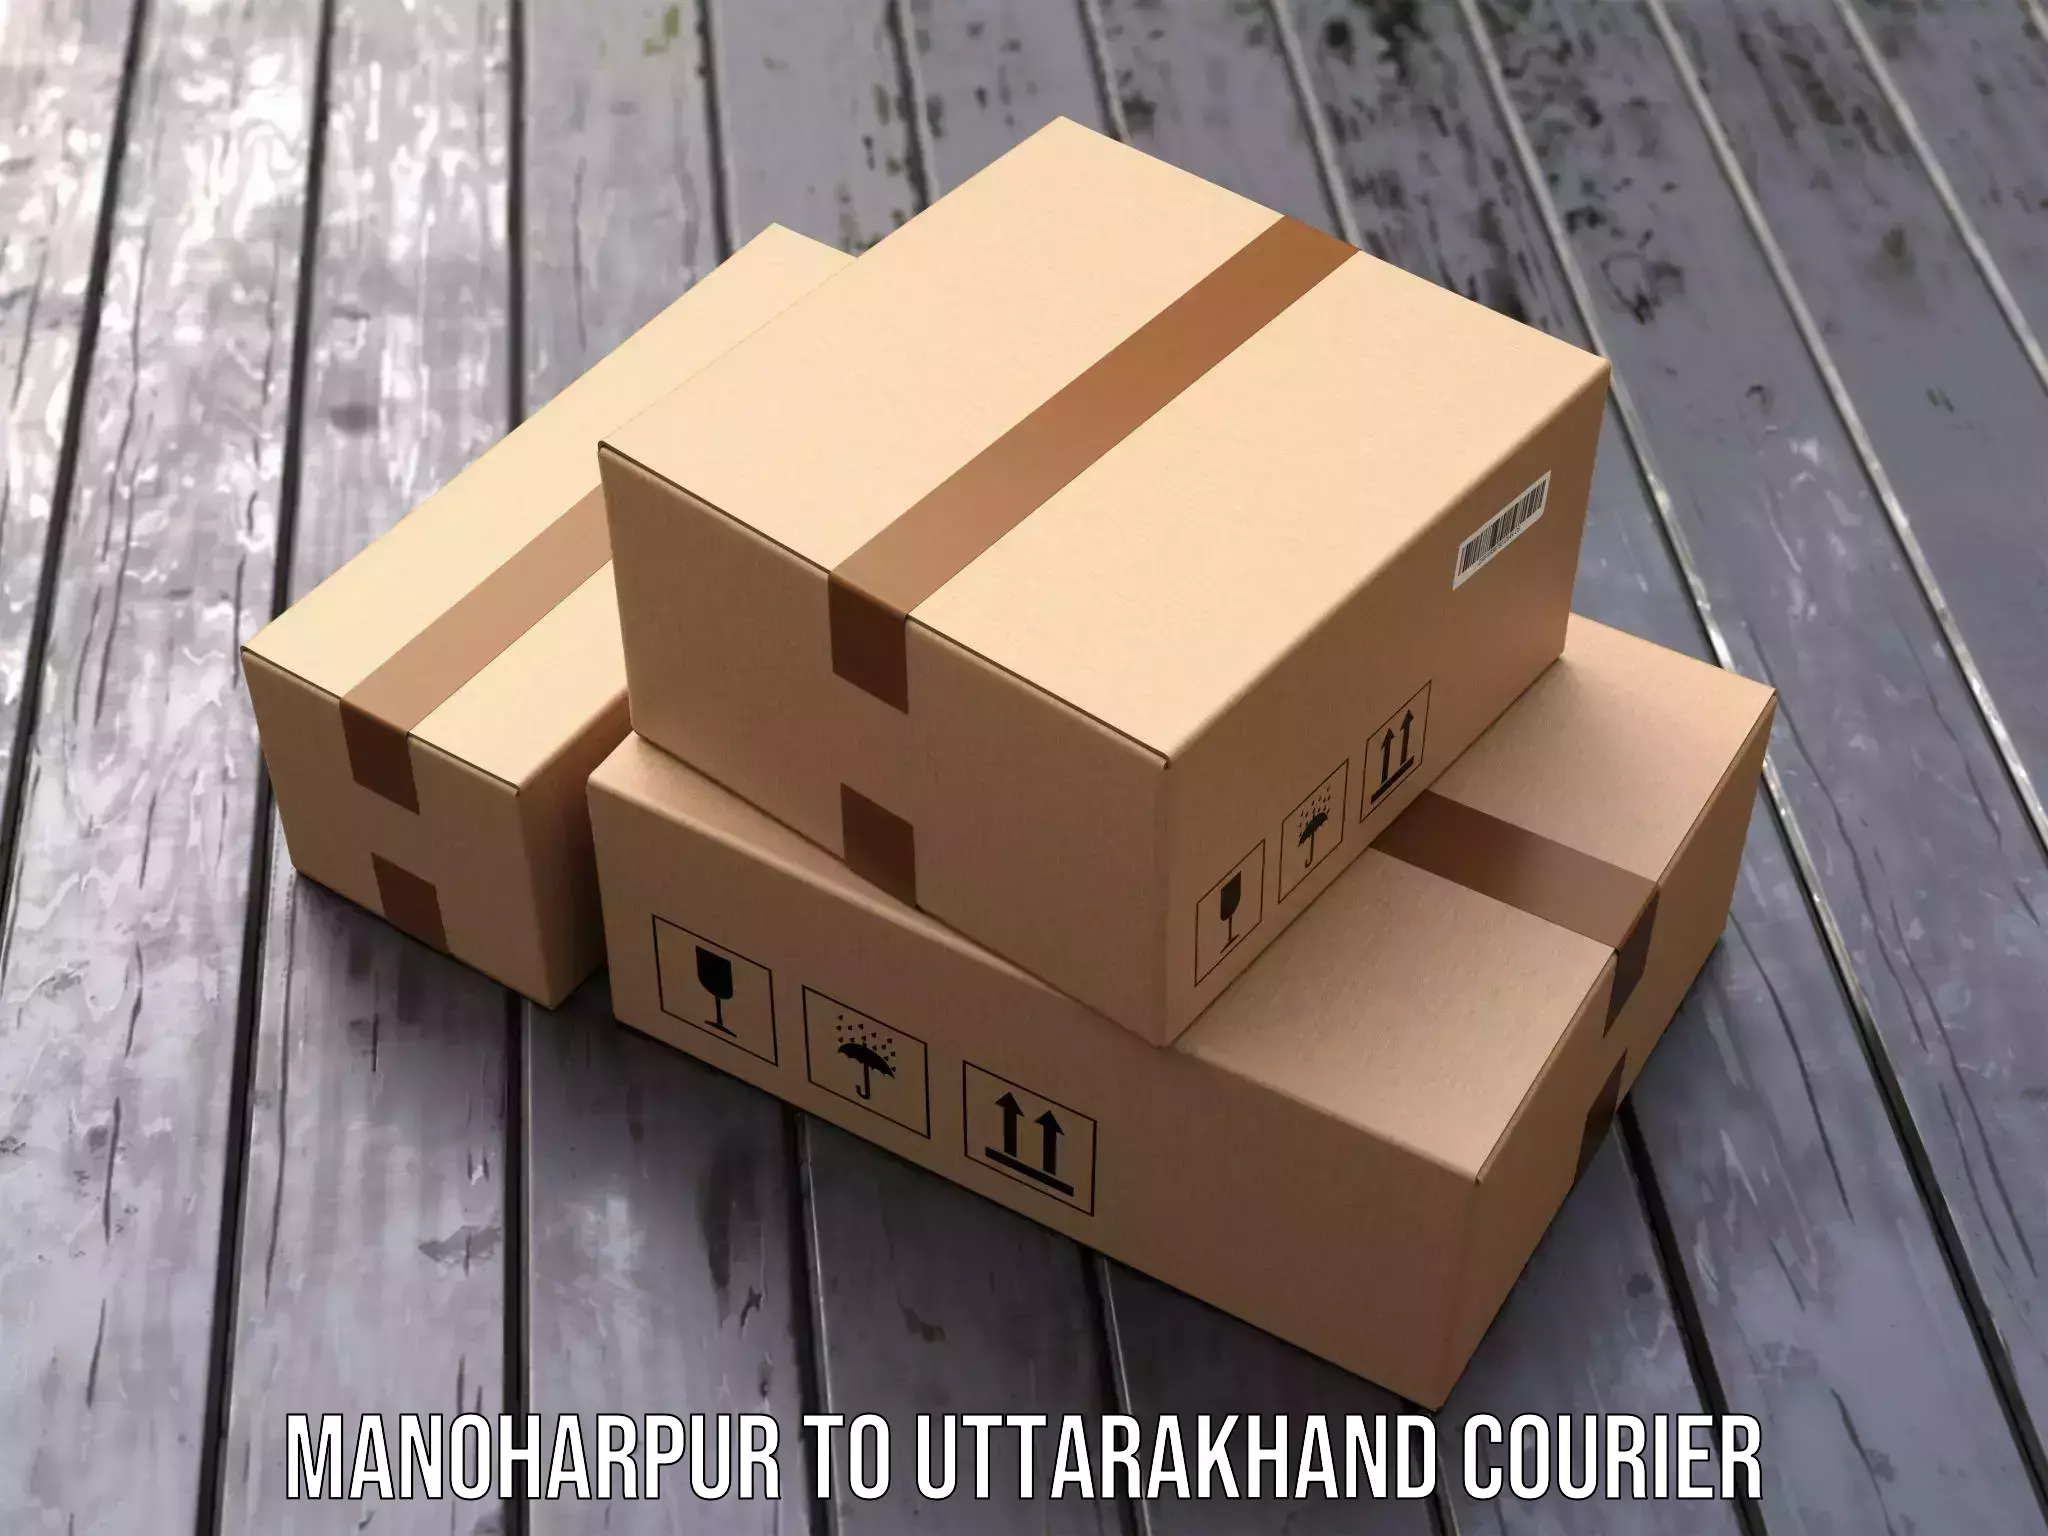 Global shipping solutions Manoharpur to Rudrapur